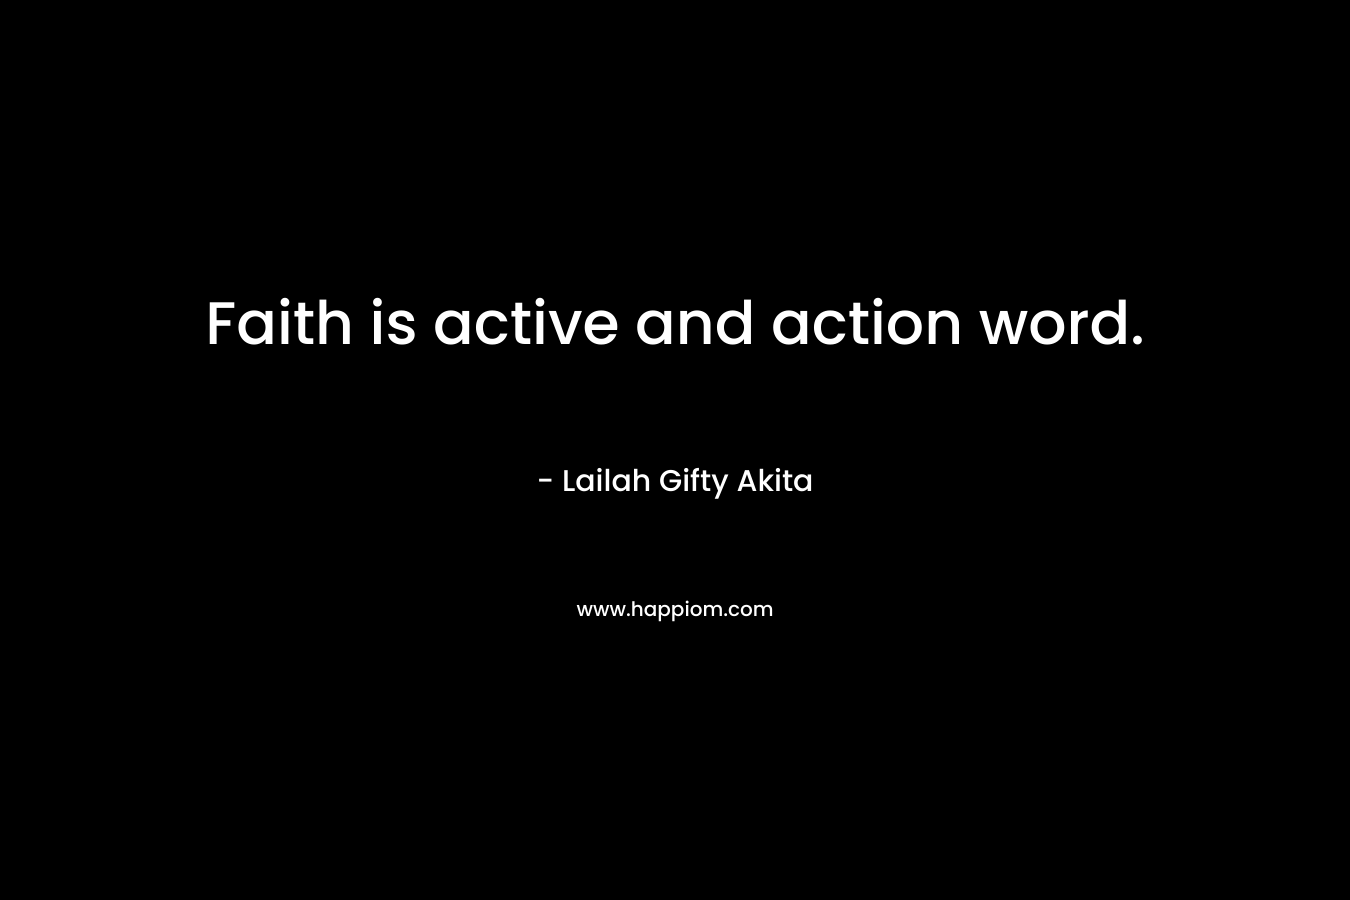 Faith is active and action word.